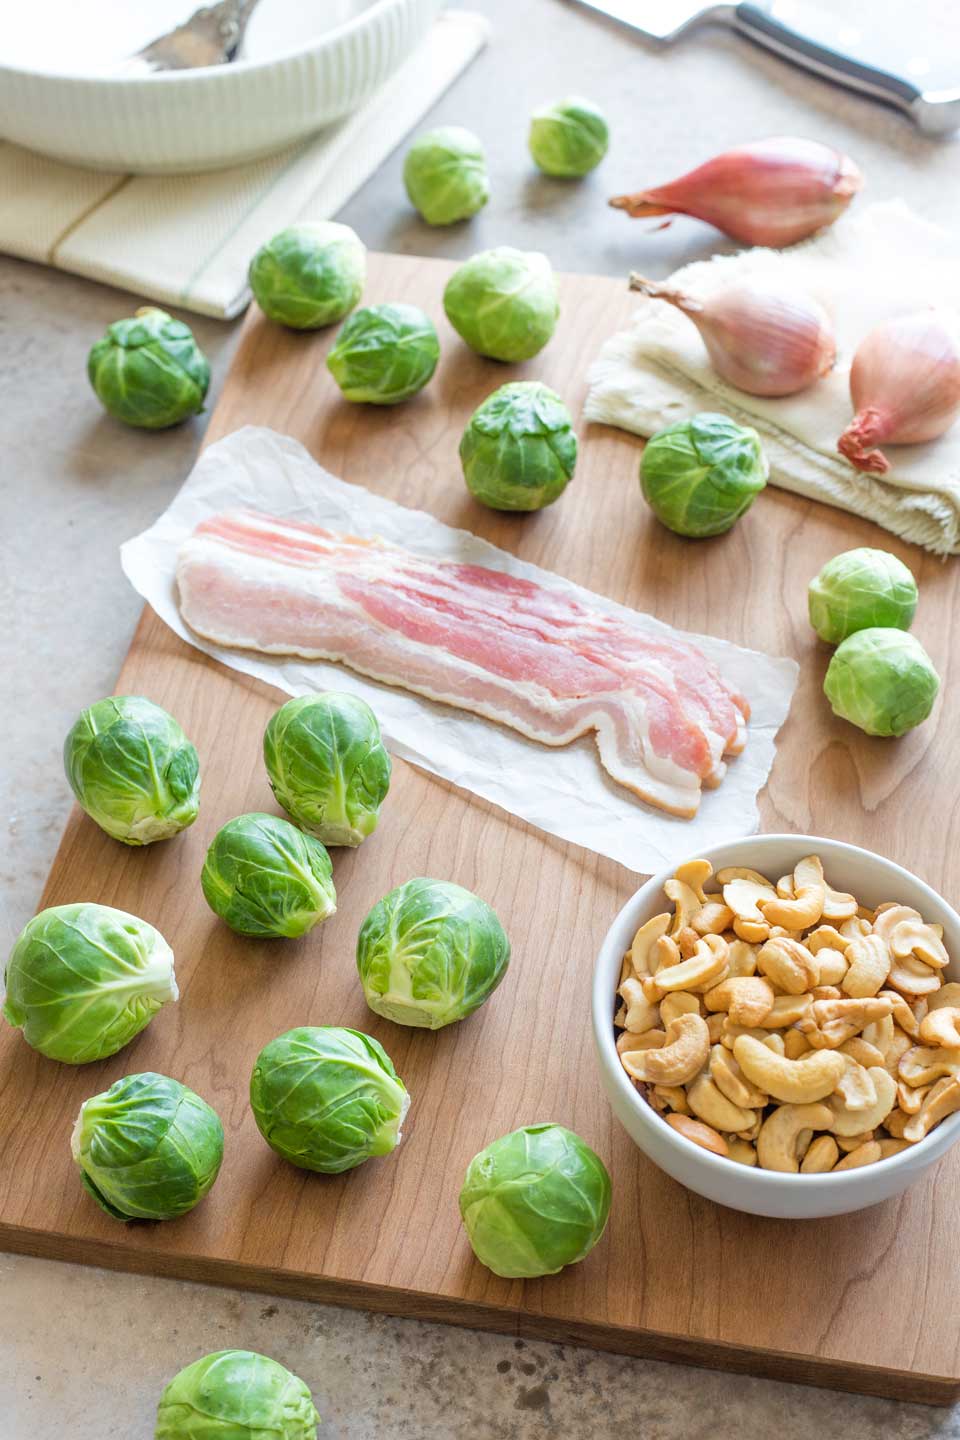 Whole Brussel sprouts scattered on cutting board with slices of bacon, unpeeled shallots and a bowl of cashews.